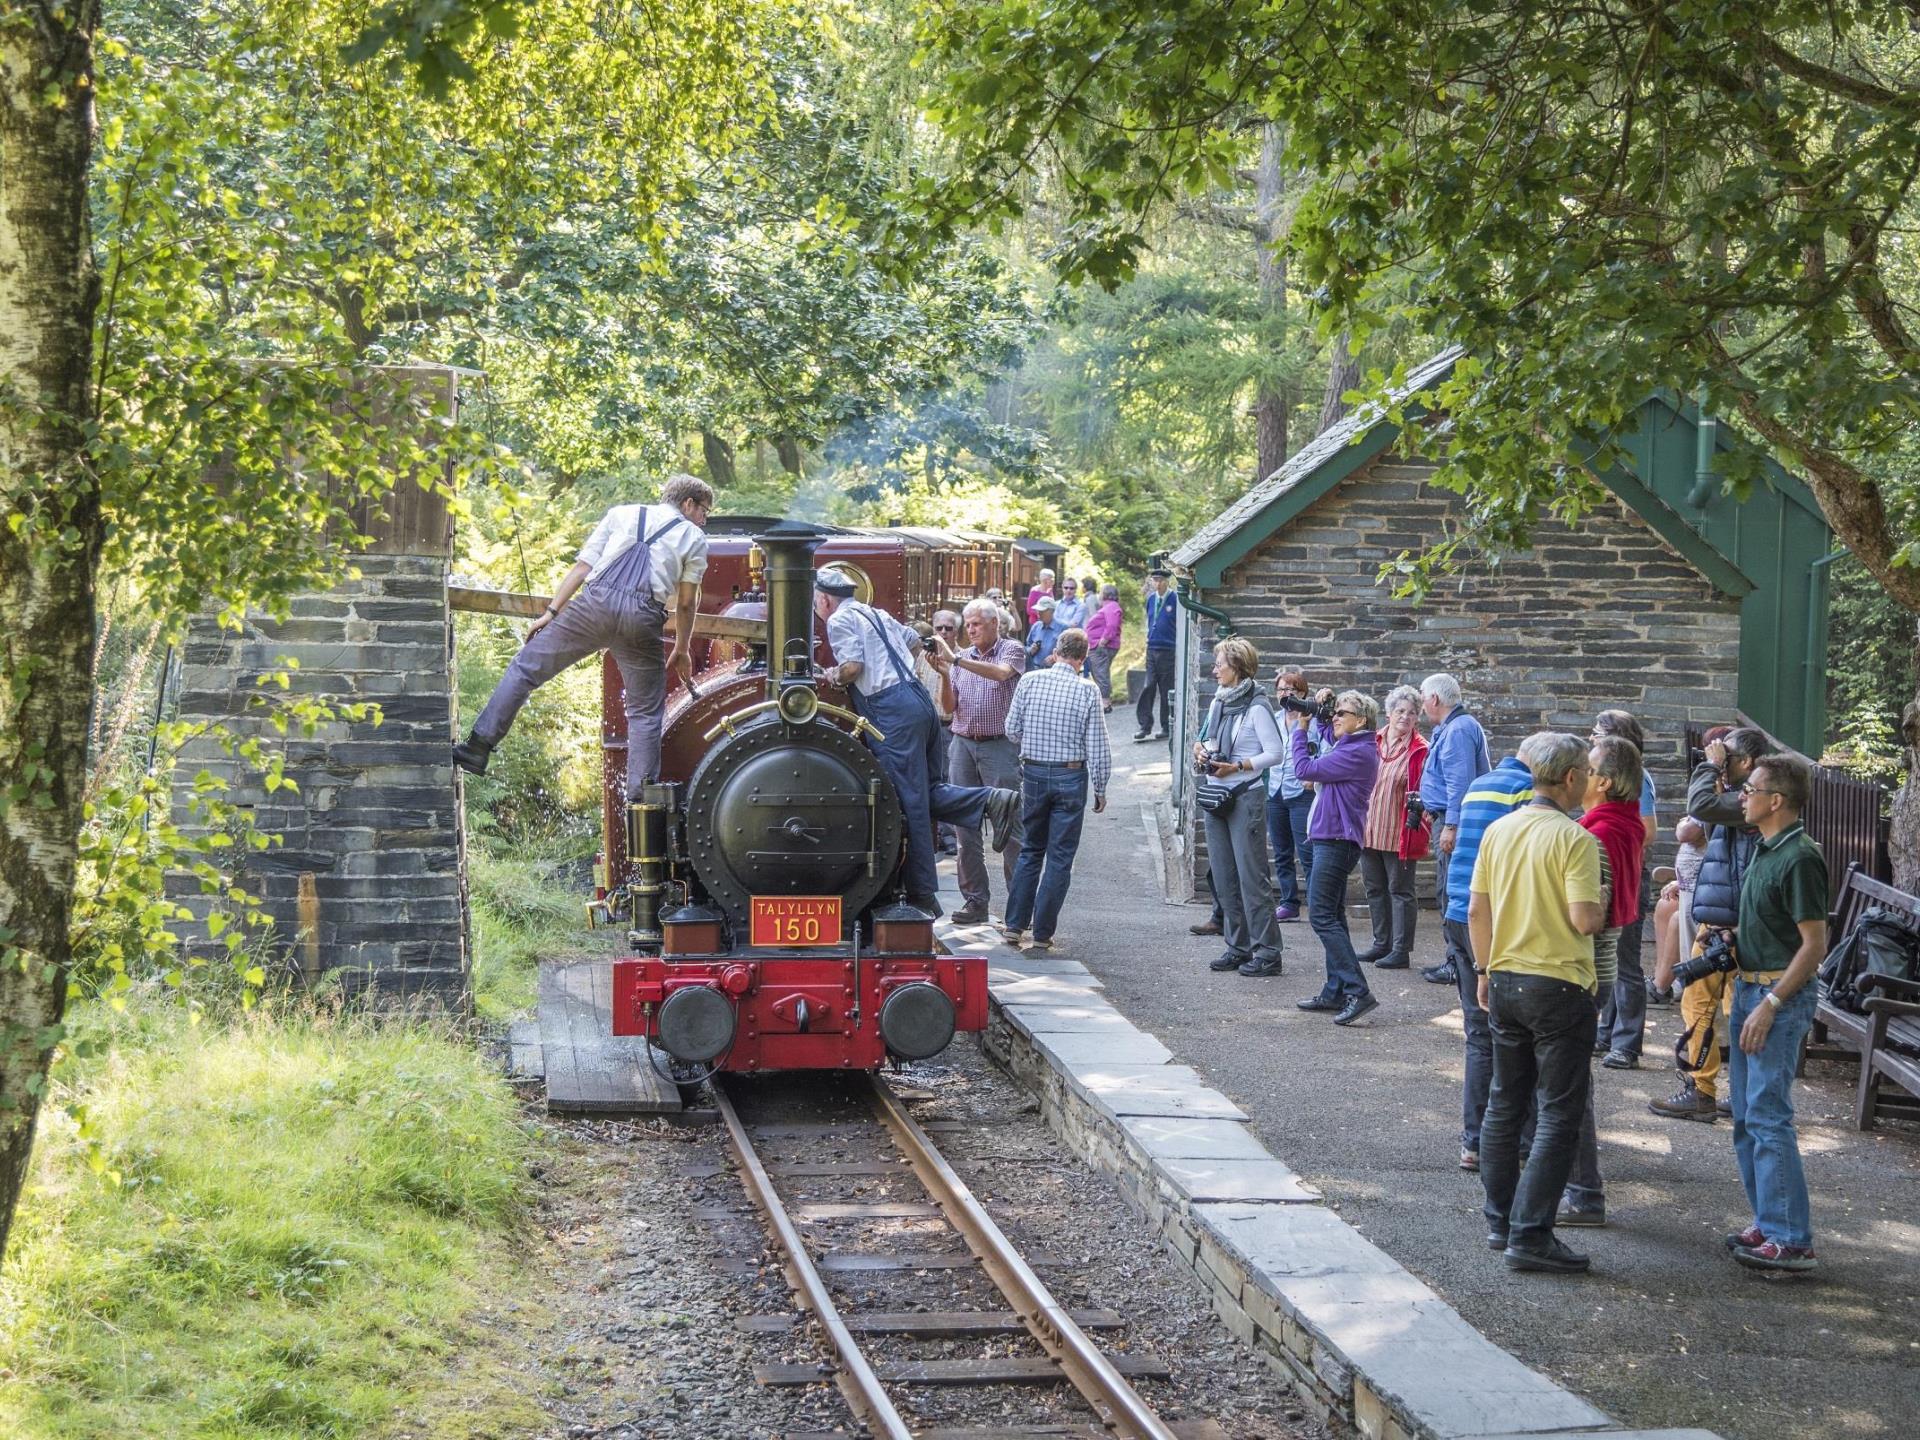 Taking water at Dolgoch Station